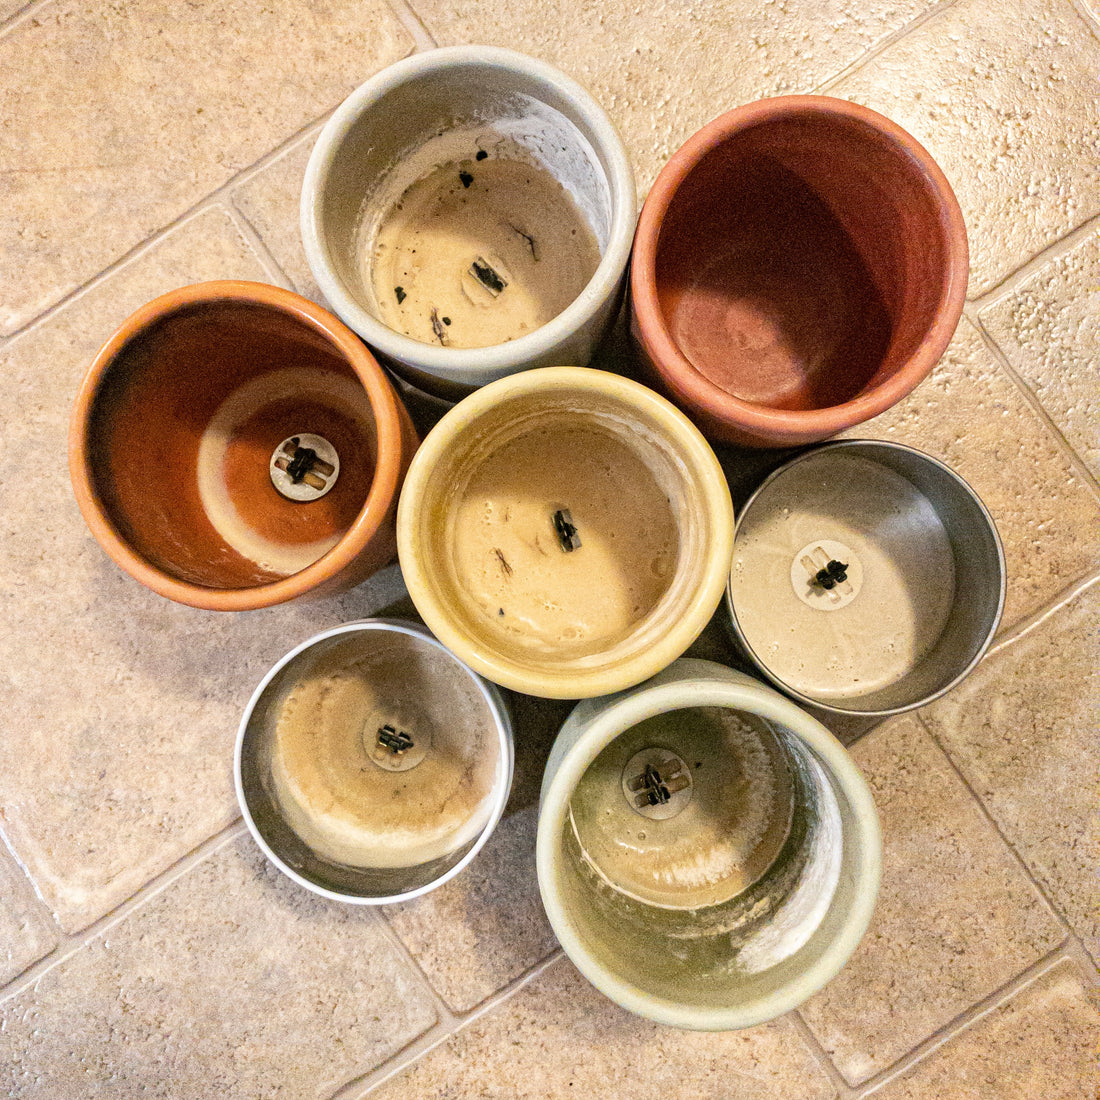 Several used candle tins and concrete jars, ready to be cleaned and recycled into new candles.